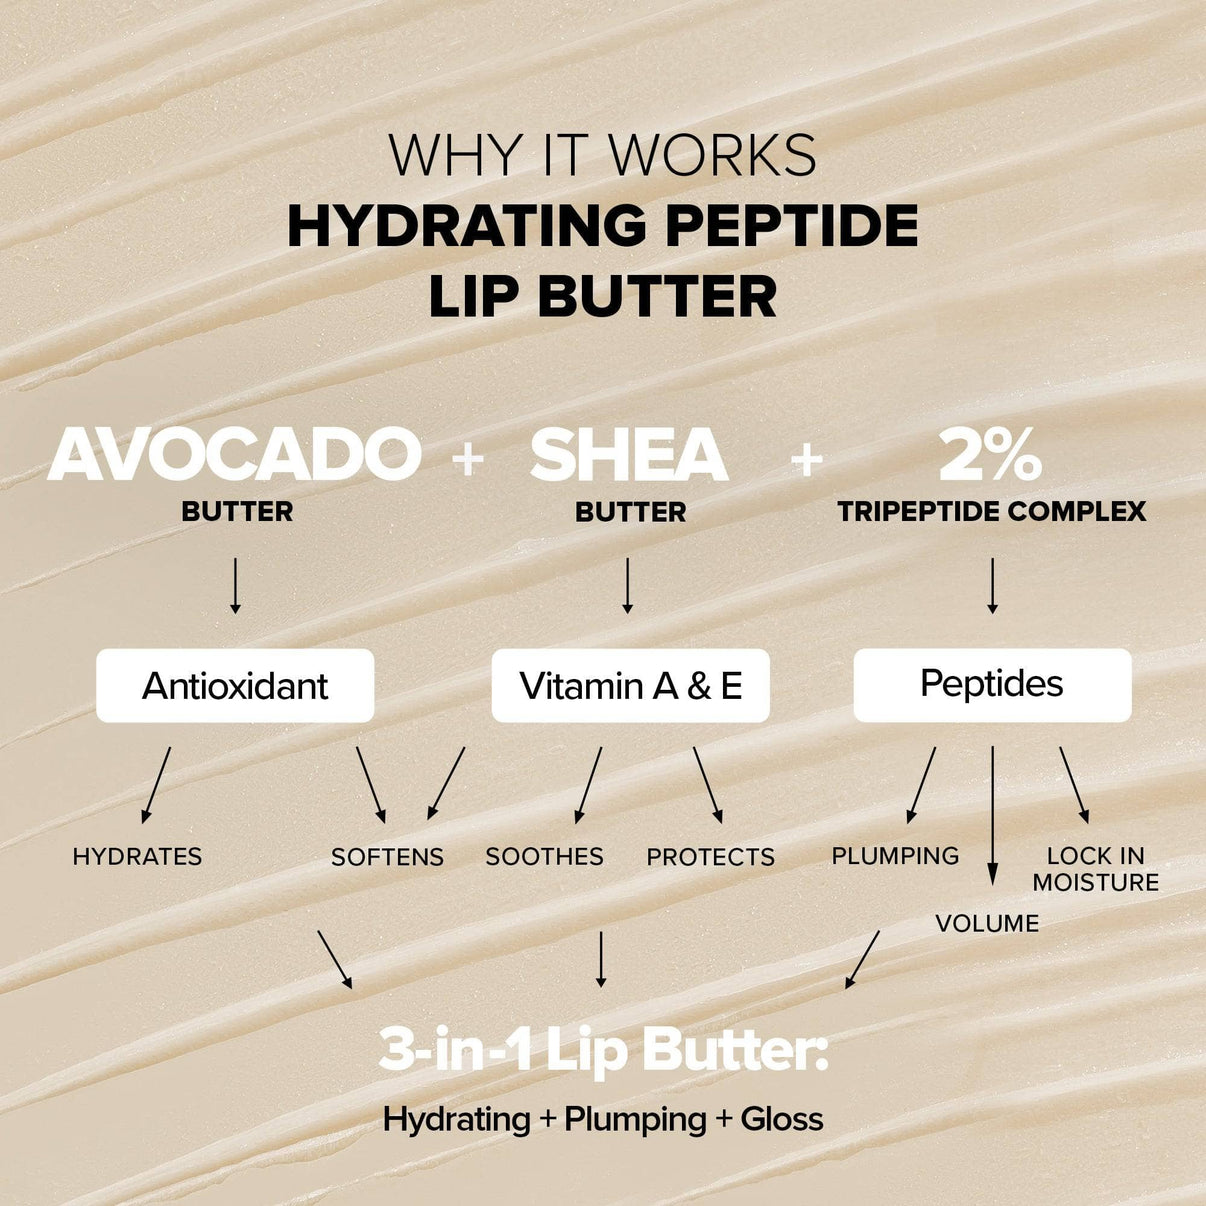 hydrating peptide lip butter why it works and product ingredients